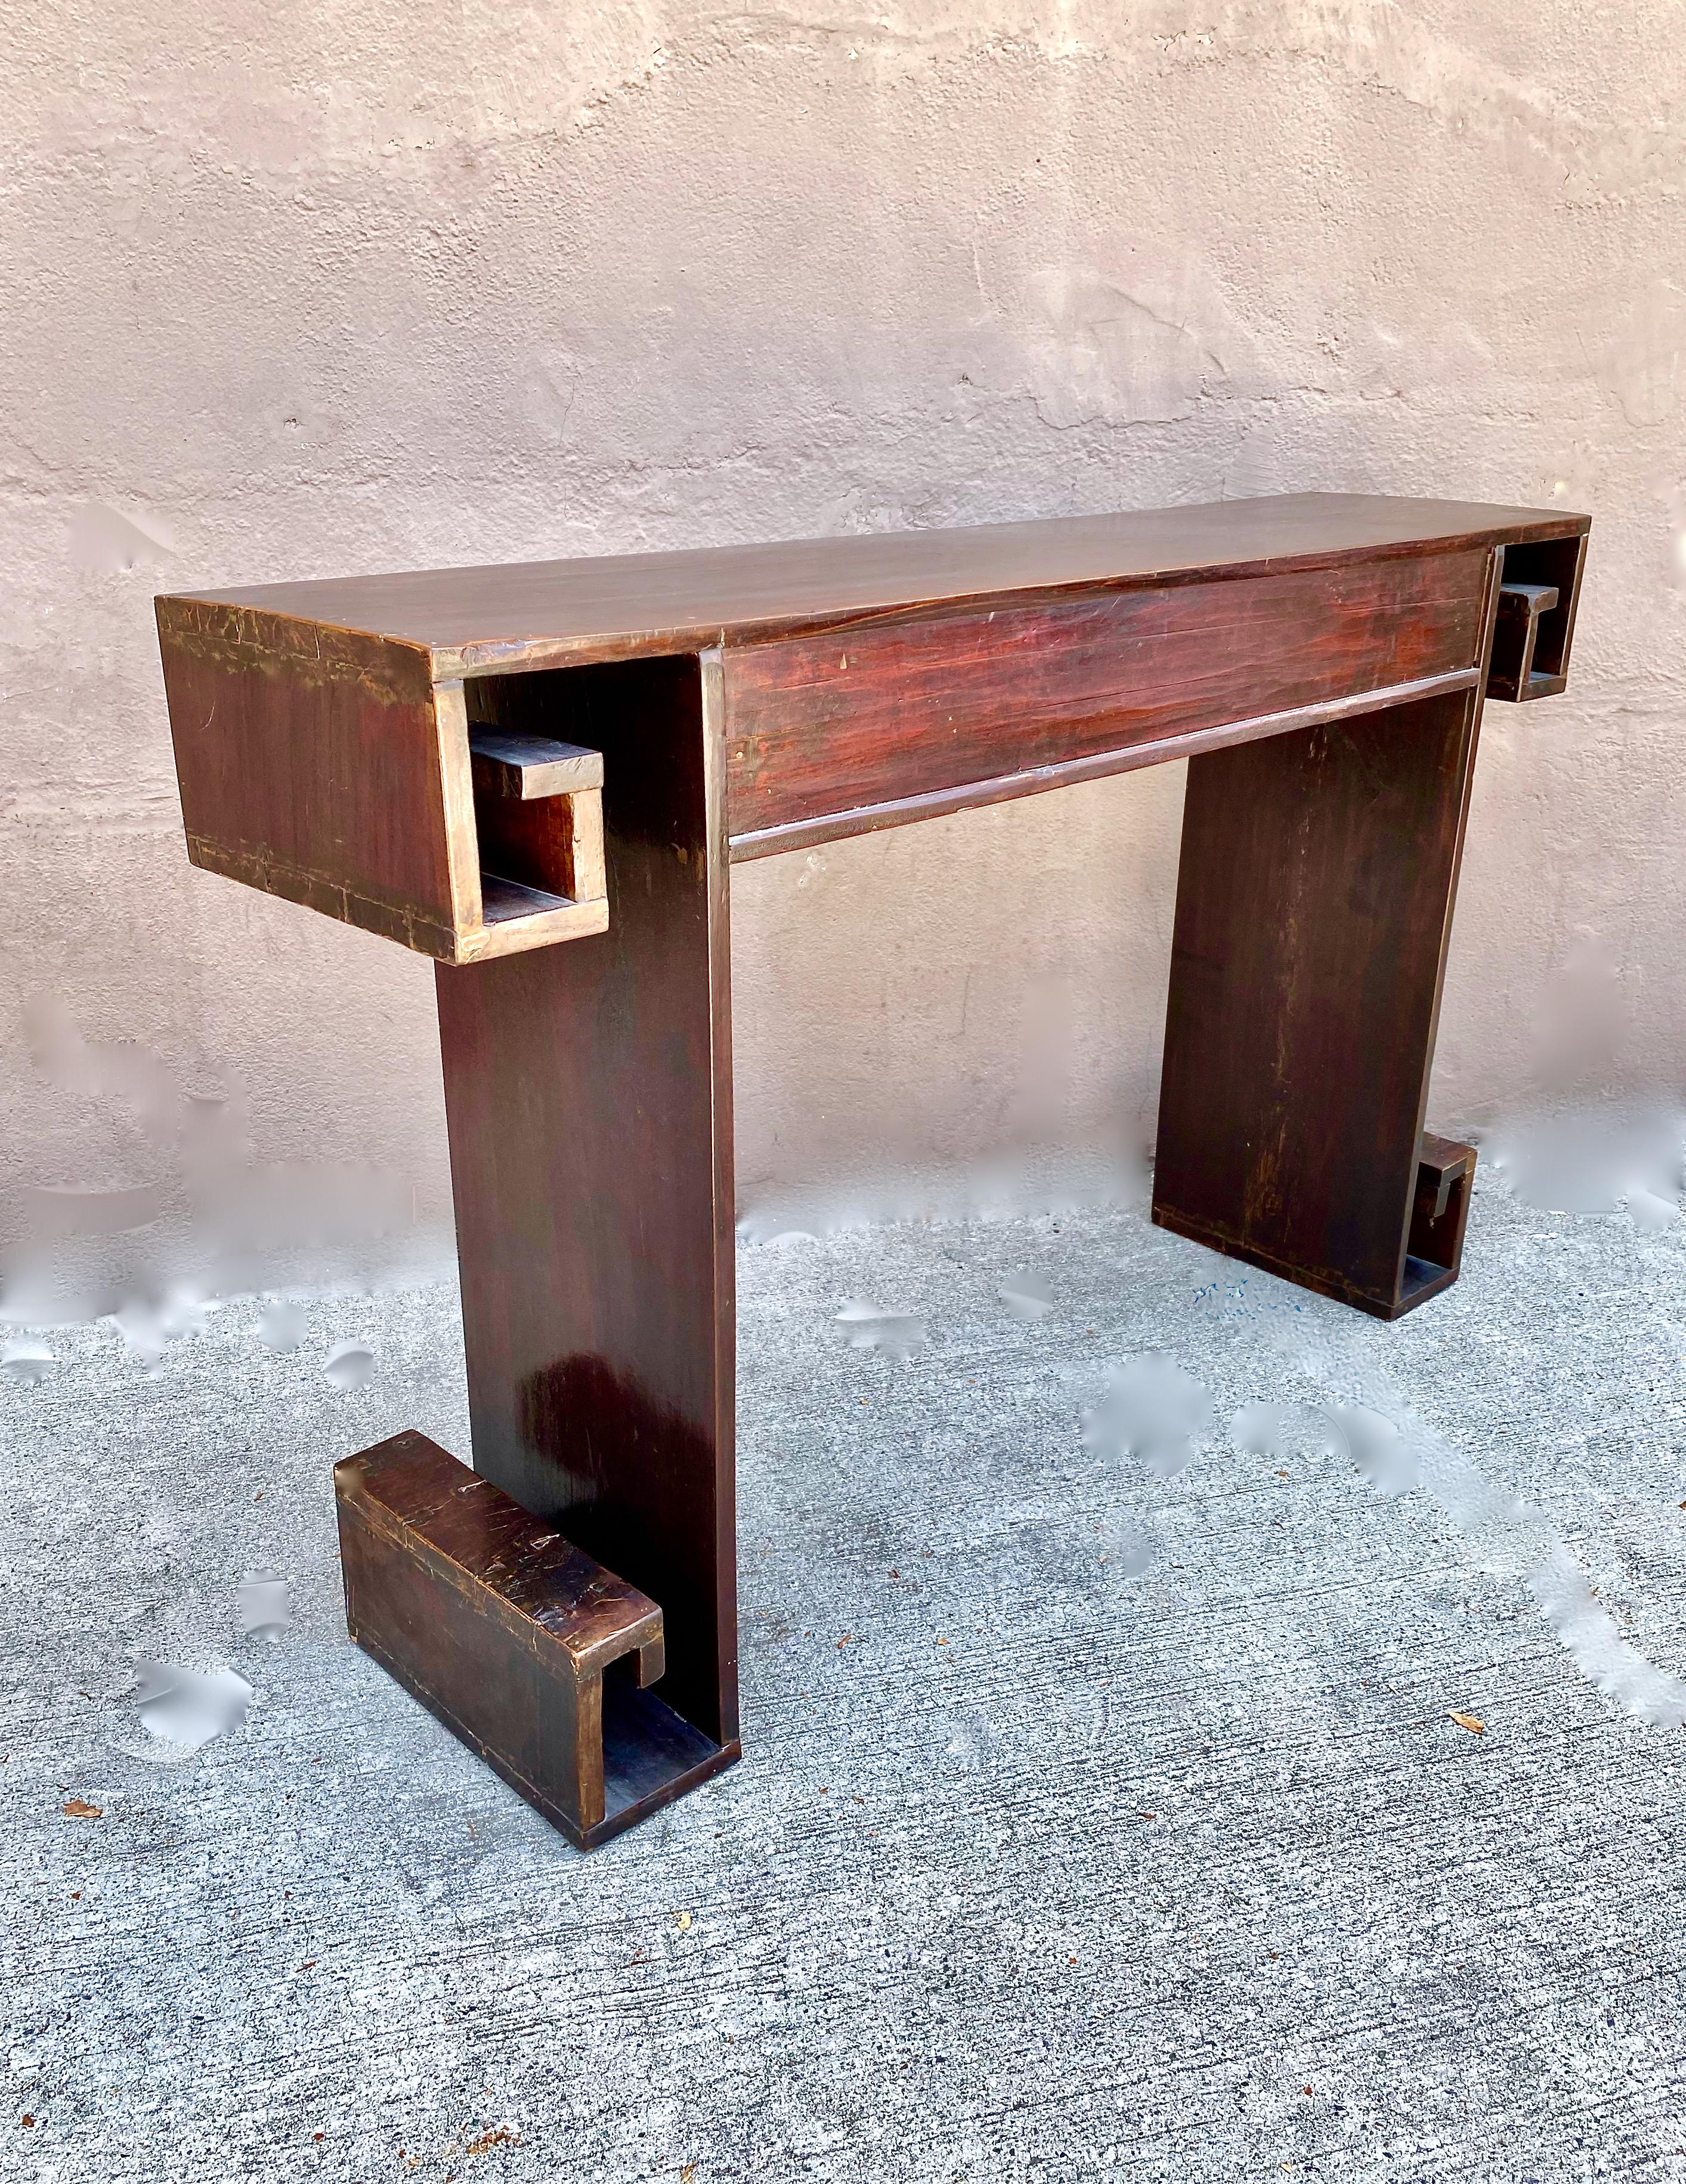 This is a very unusual and attractive early 20th century Chinese altar table. The form is heavily influenced by Art Deco which is revealed in the greek key and meander elements. The table is in overall very good condition--it is currently being